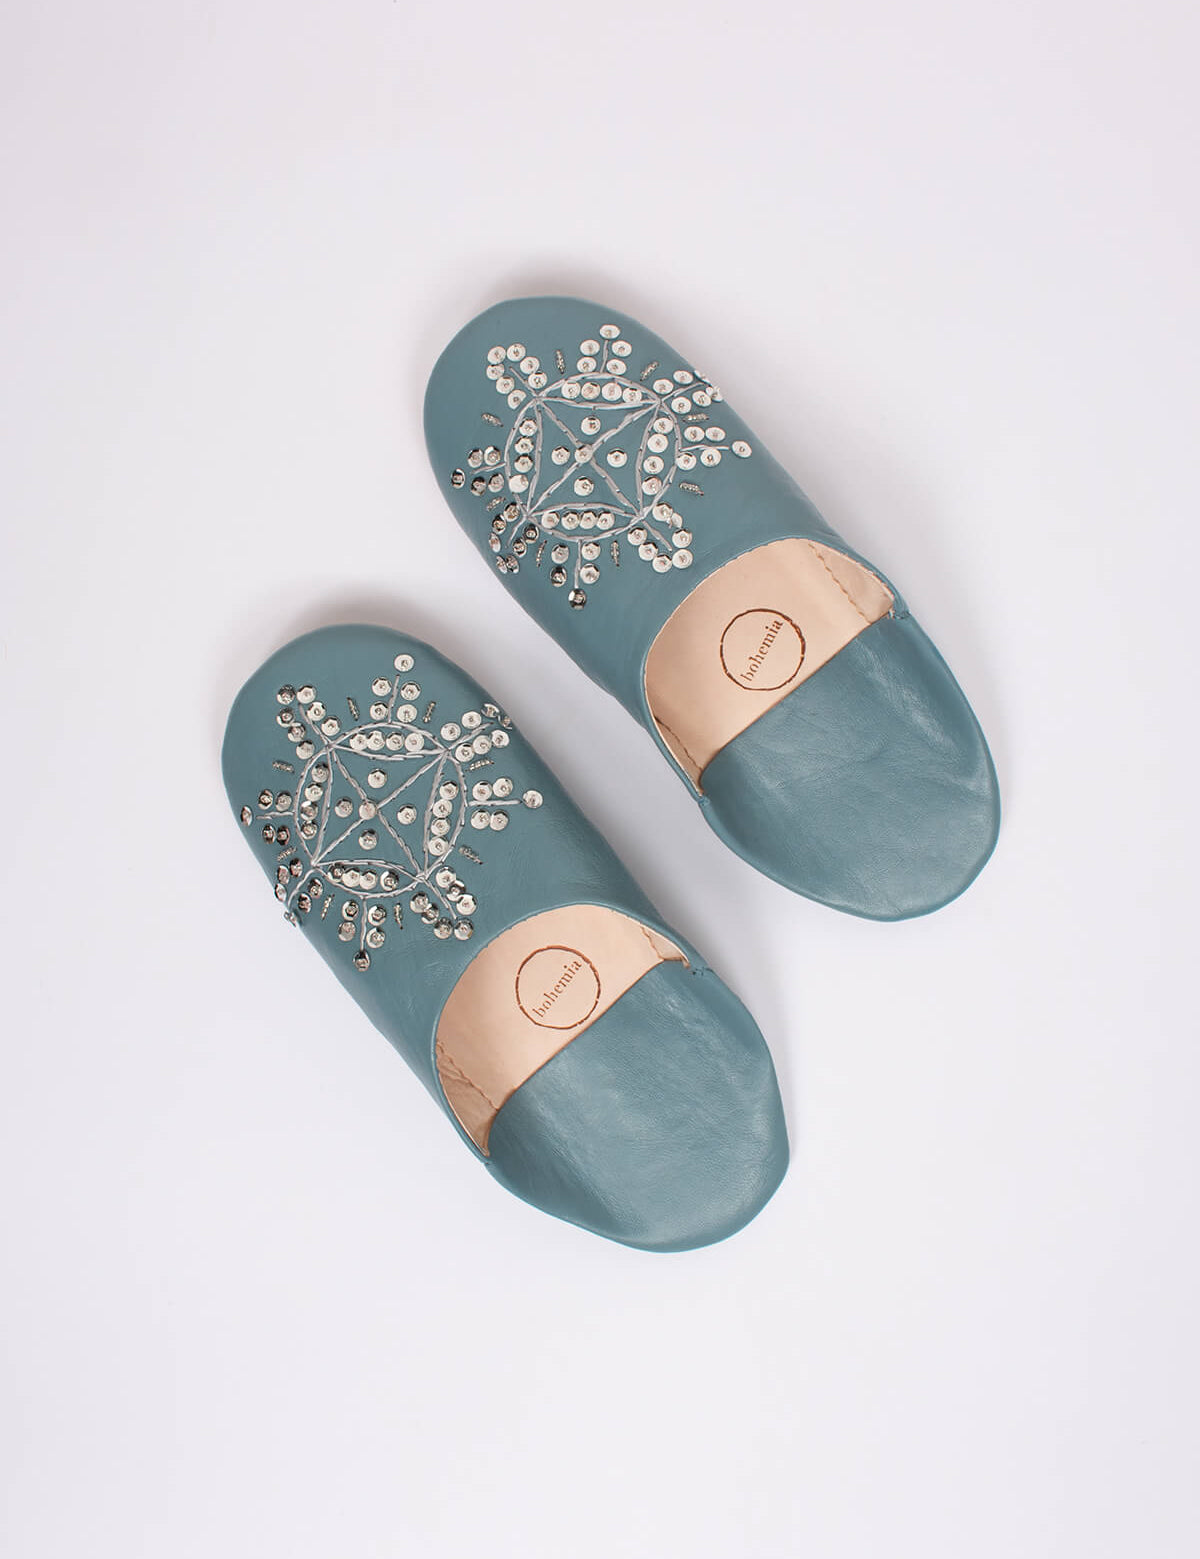 bohemia-design-leather-babouche-sequin-slippers-slate-grey_14a7c104-1c30-4559-8c4c-a30ac313c6bf.jpg